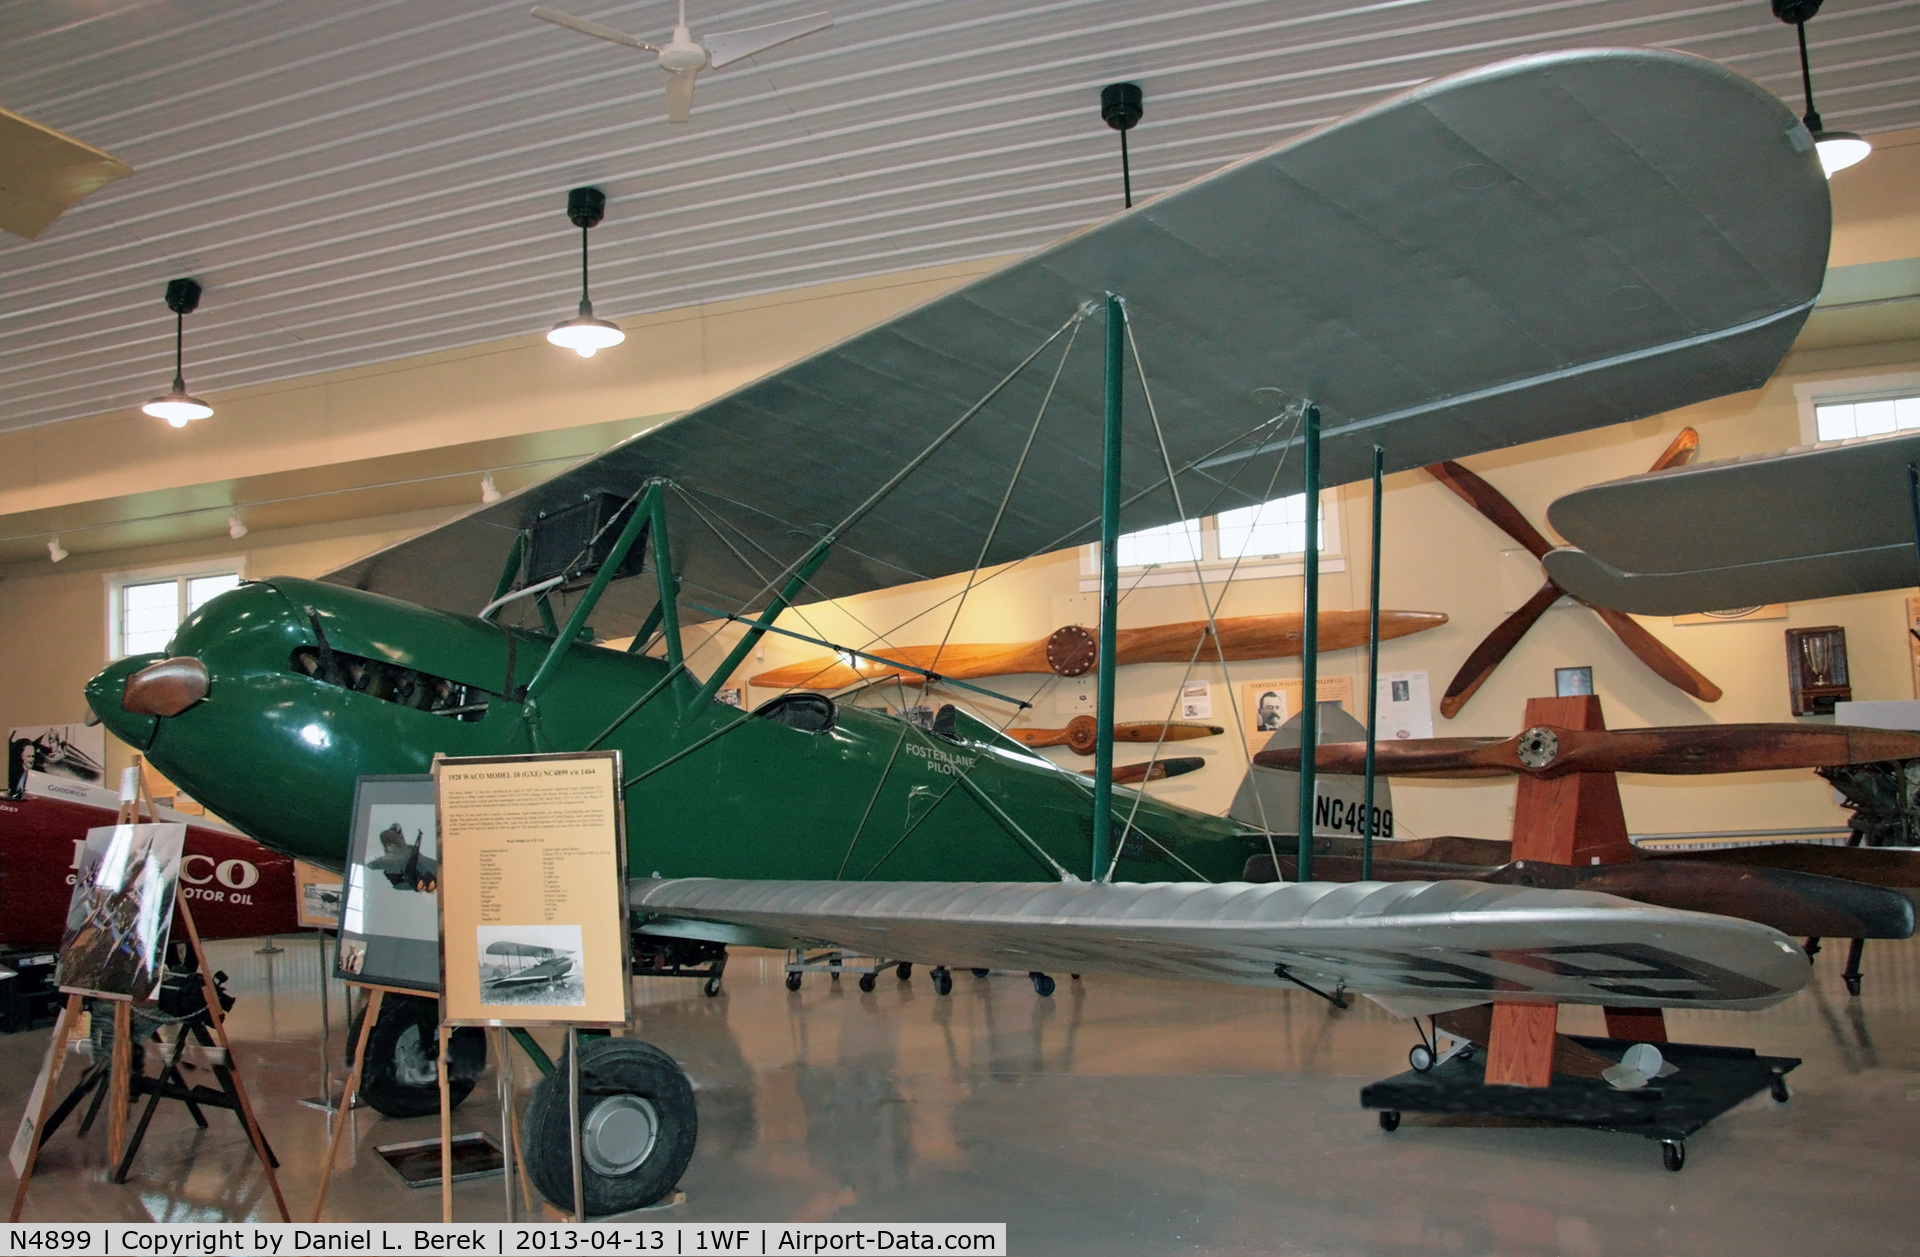 N4899, 1928 Waco GXE C/N 1464, This beauty is preserved at the Waco Aircraft Museum, at her birthplace, Troy, OH.